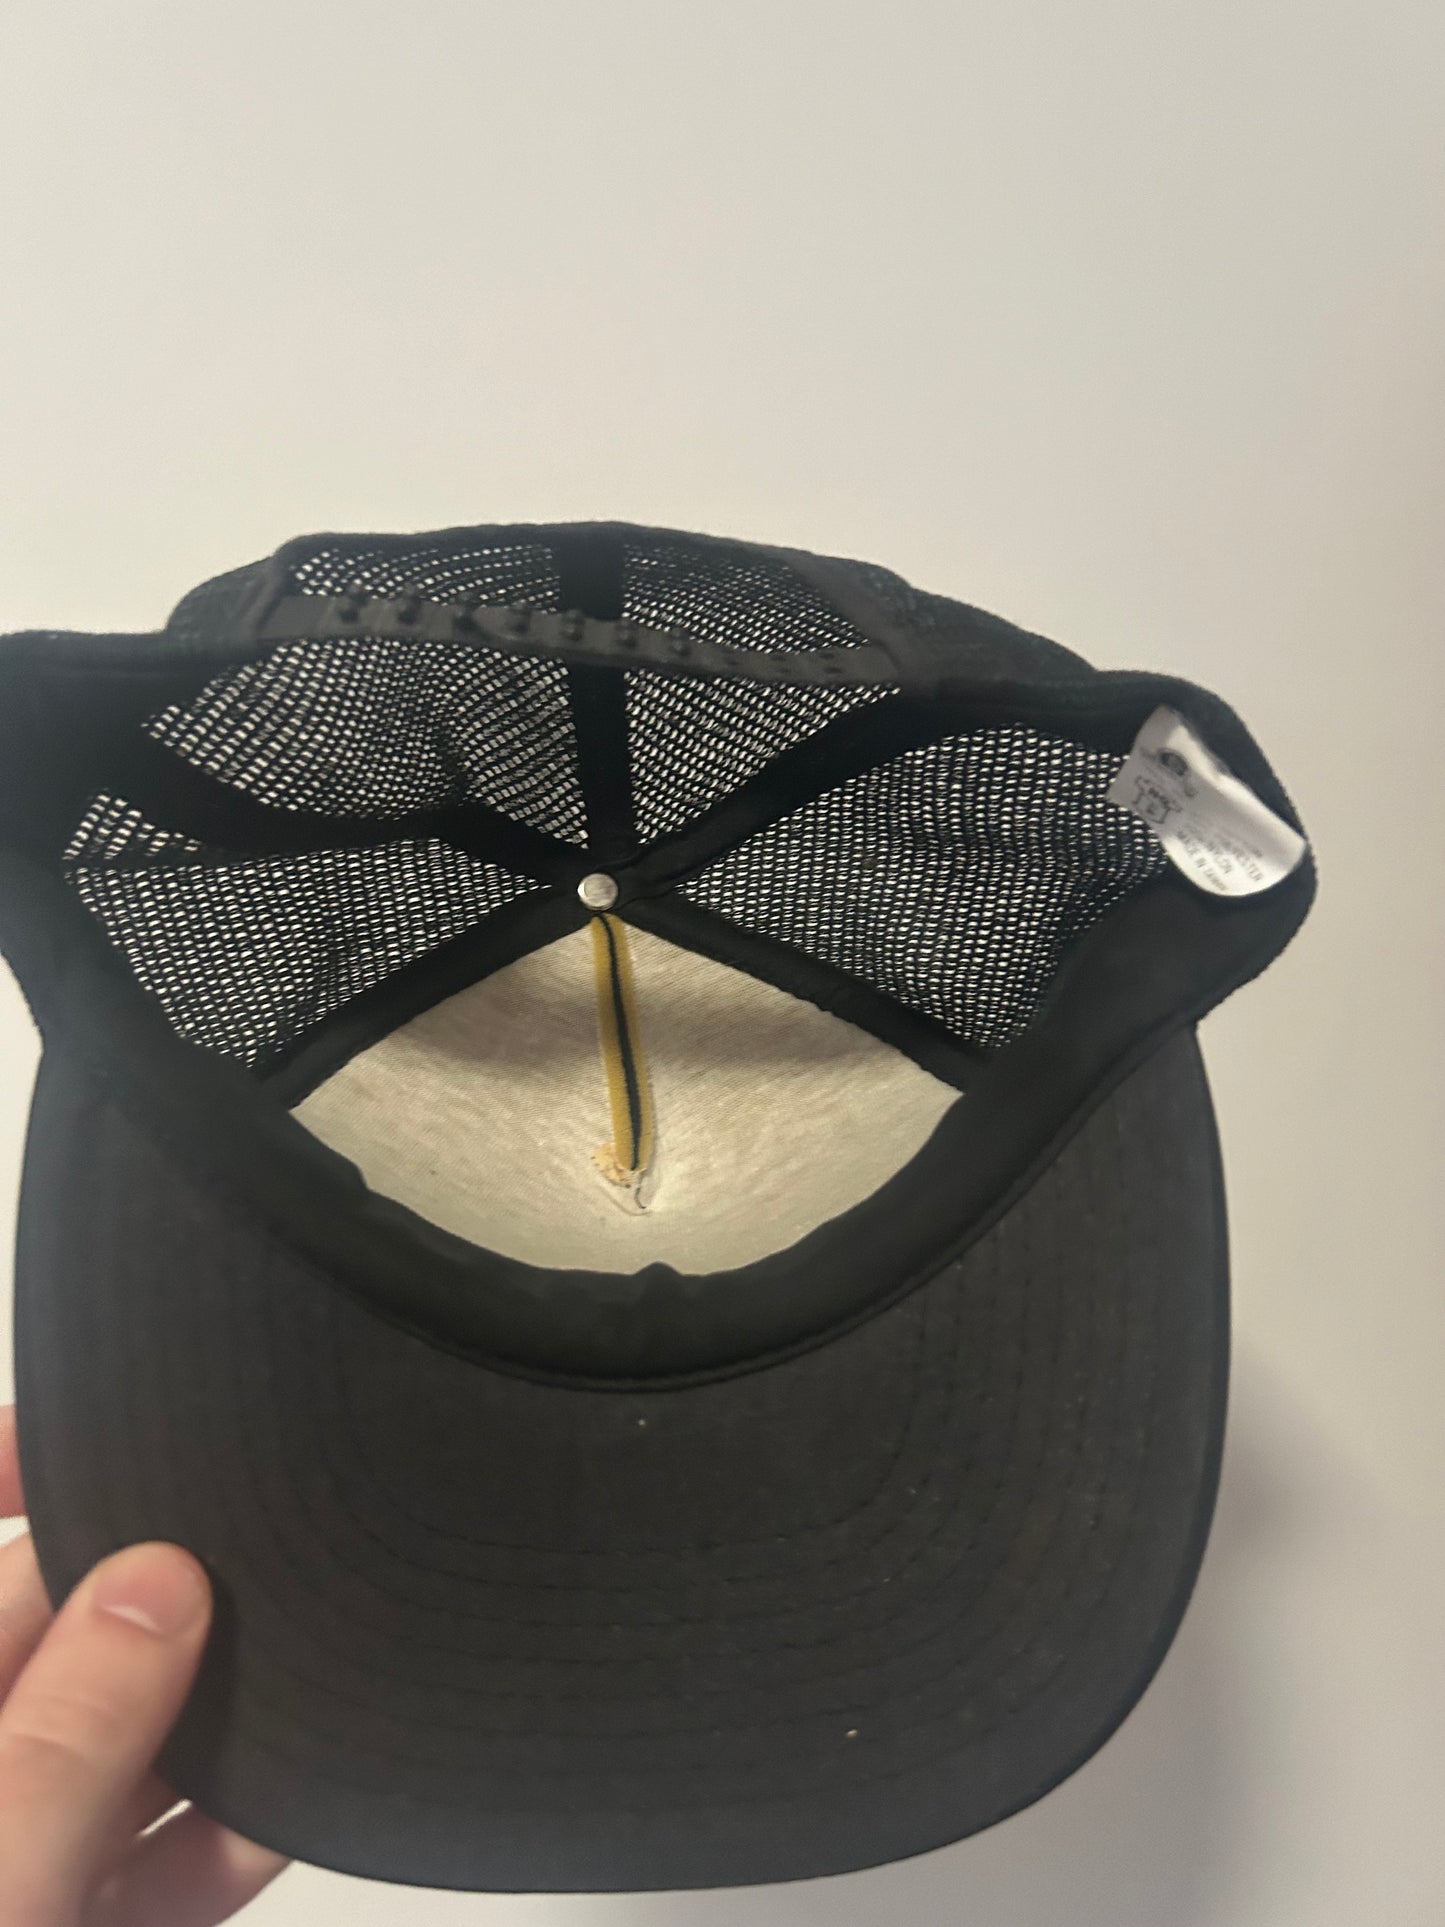 1990s Harley Relief Hat